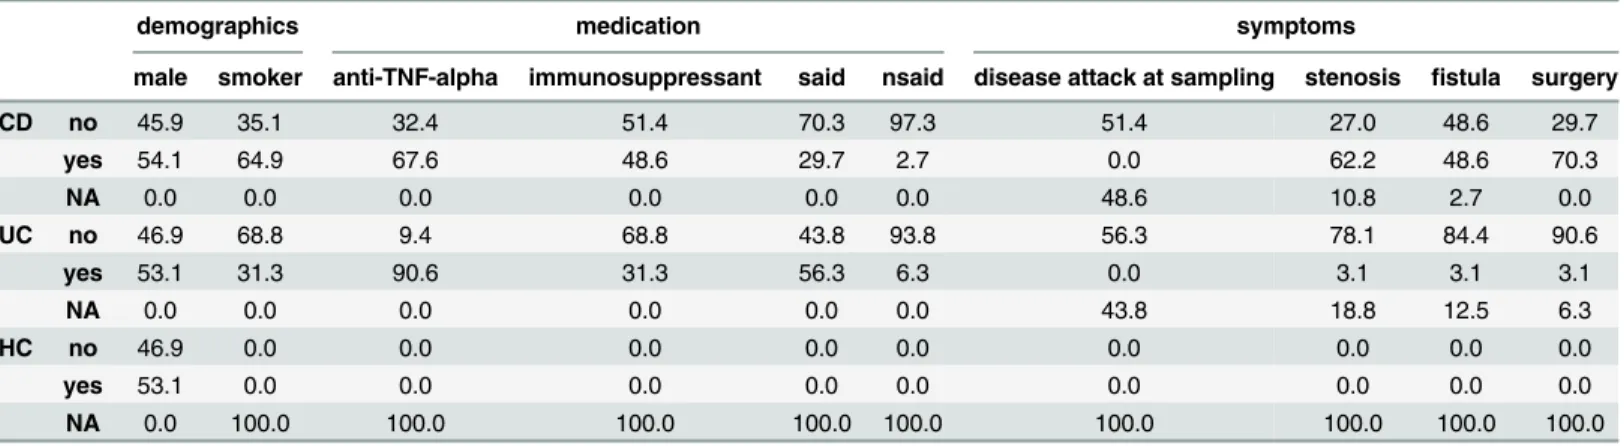 Table 1. Characterization of the study subjects. Grouped by CD, UC and HC frequency information (in percent) on demographics (gender and smoking status), medication (anti-TNF-α, immunosuppressant, SAIDs and NSAIDs) as well as symptoms (disease attack at sa